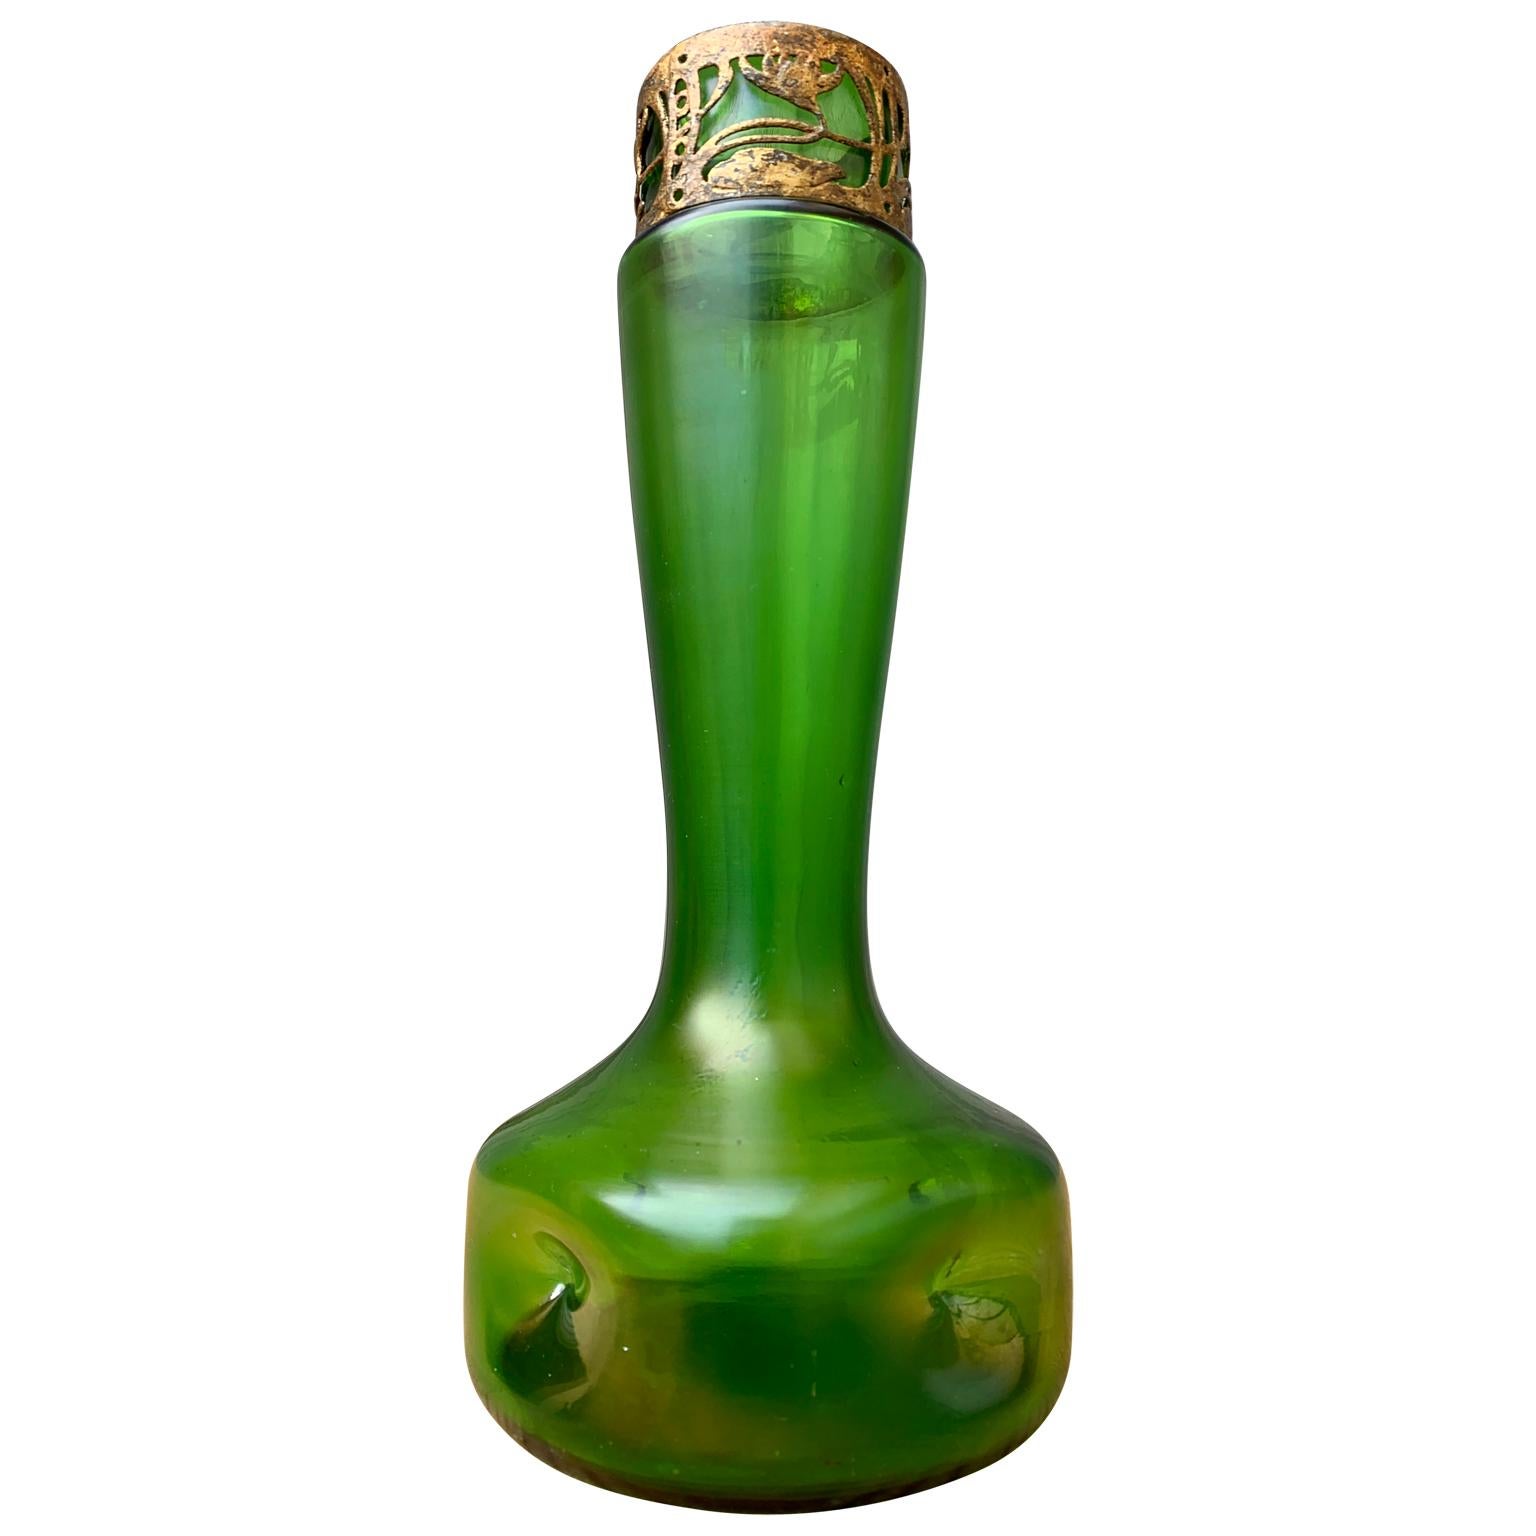 An early 19th century green glass Art Nouveau vase with gilded and flower decorated metal finial.